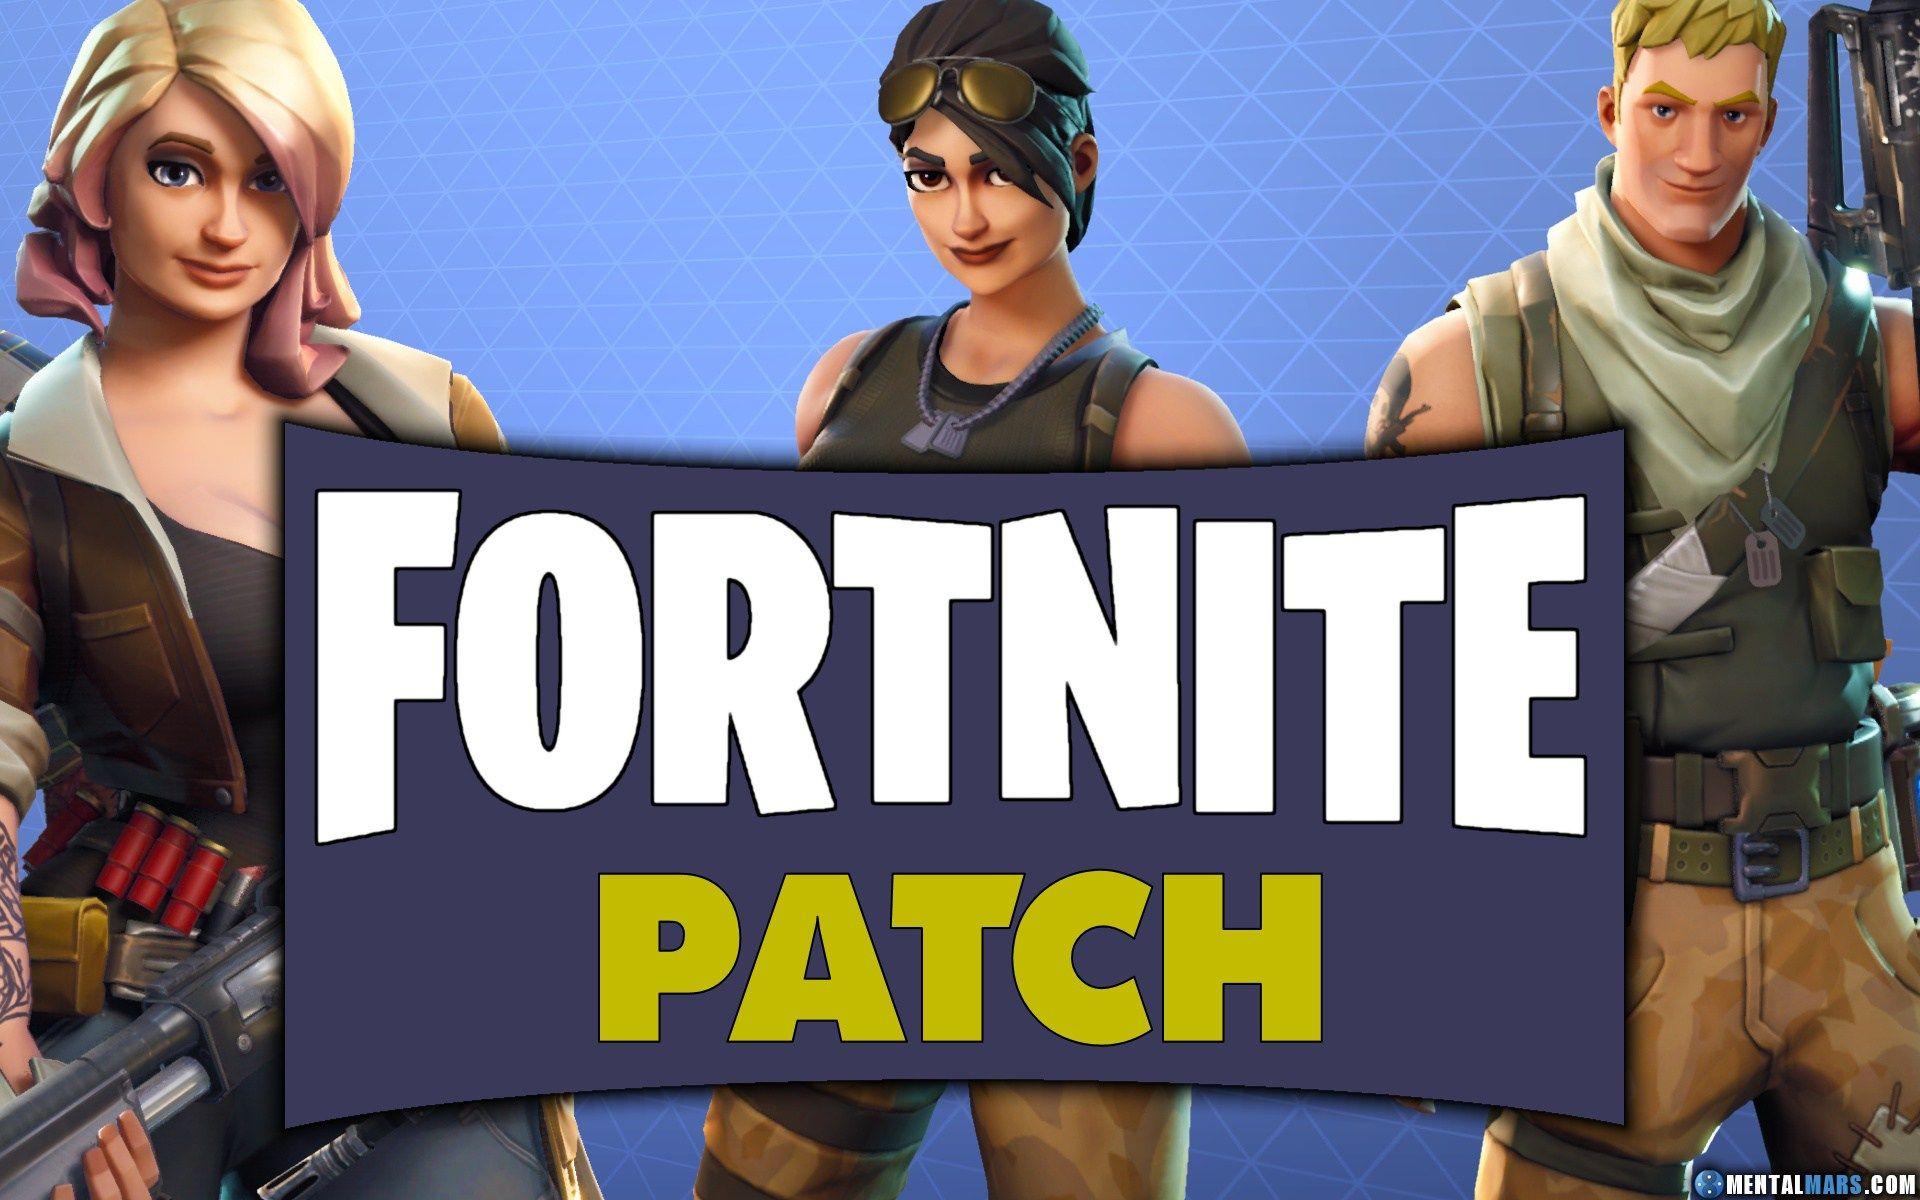 Fortnite Patch Notes 1.11